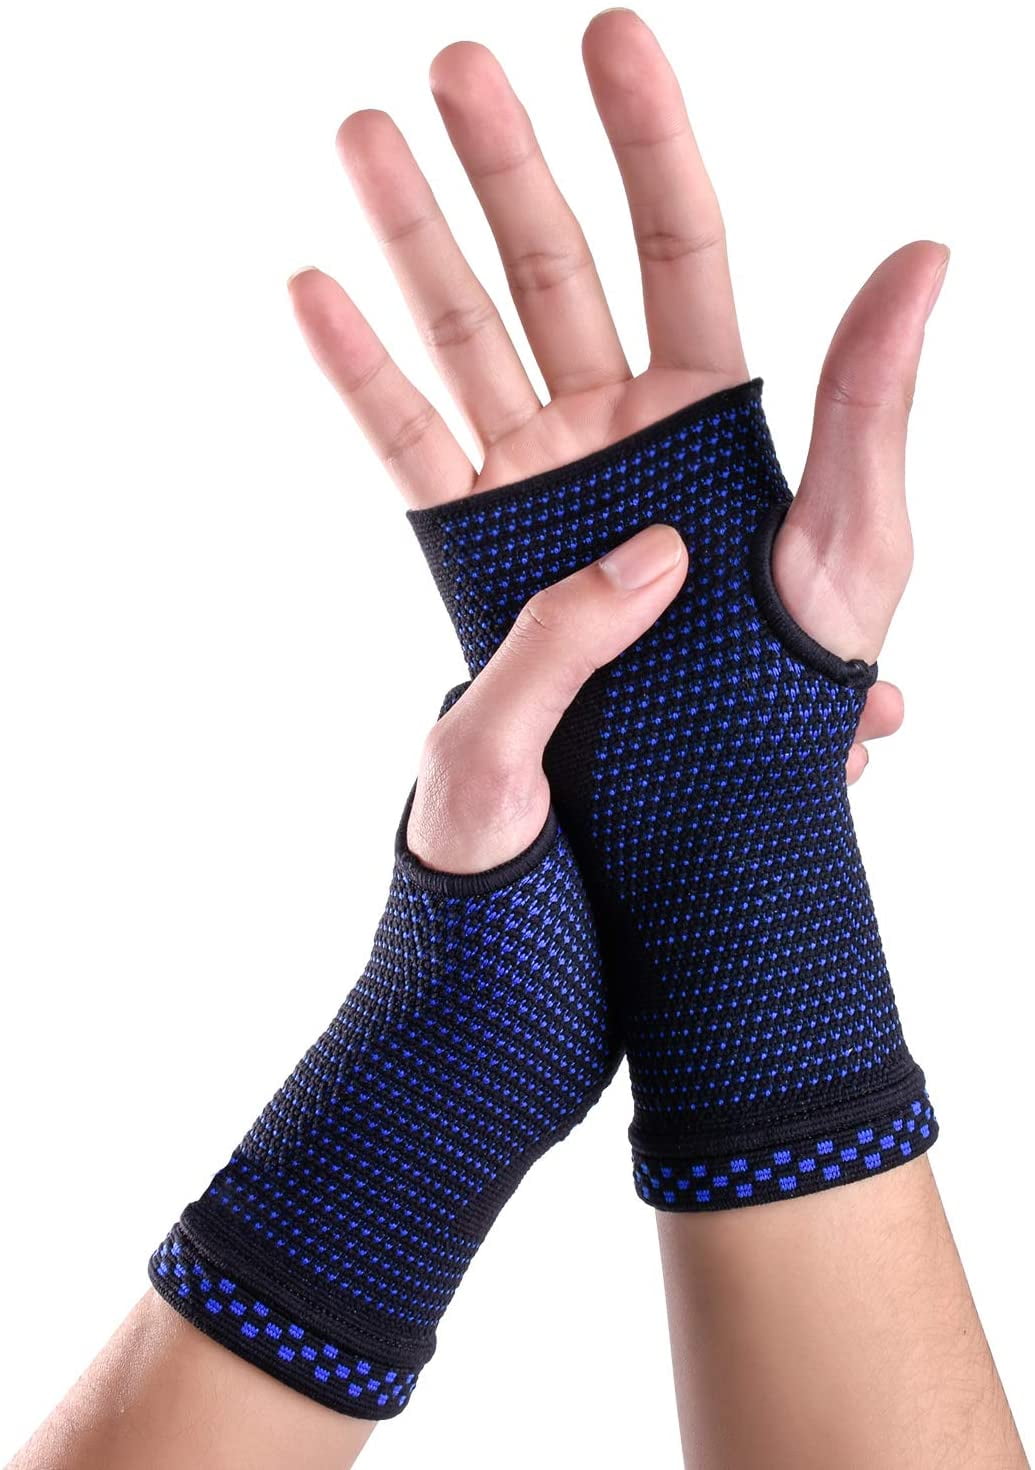 Black, L 2 Pack Wrist Brace Carpal Tunnel Wrist Wraps Support Sleeves for Work Fitness Weightlifting Sprains Tendonitis Pain Relief Breathable Wristbands Compression Wrist Strap 